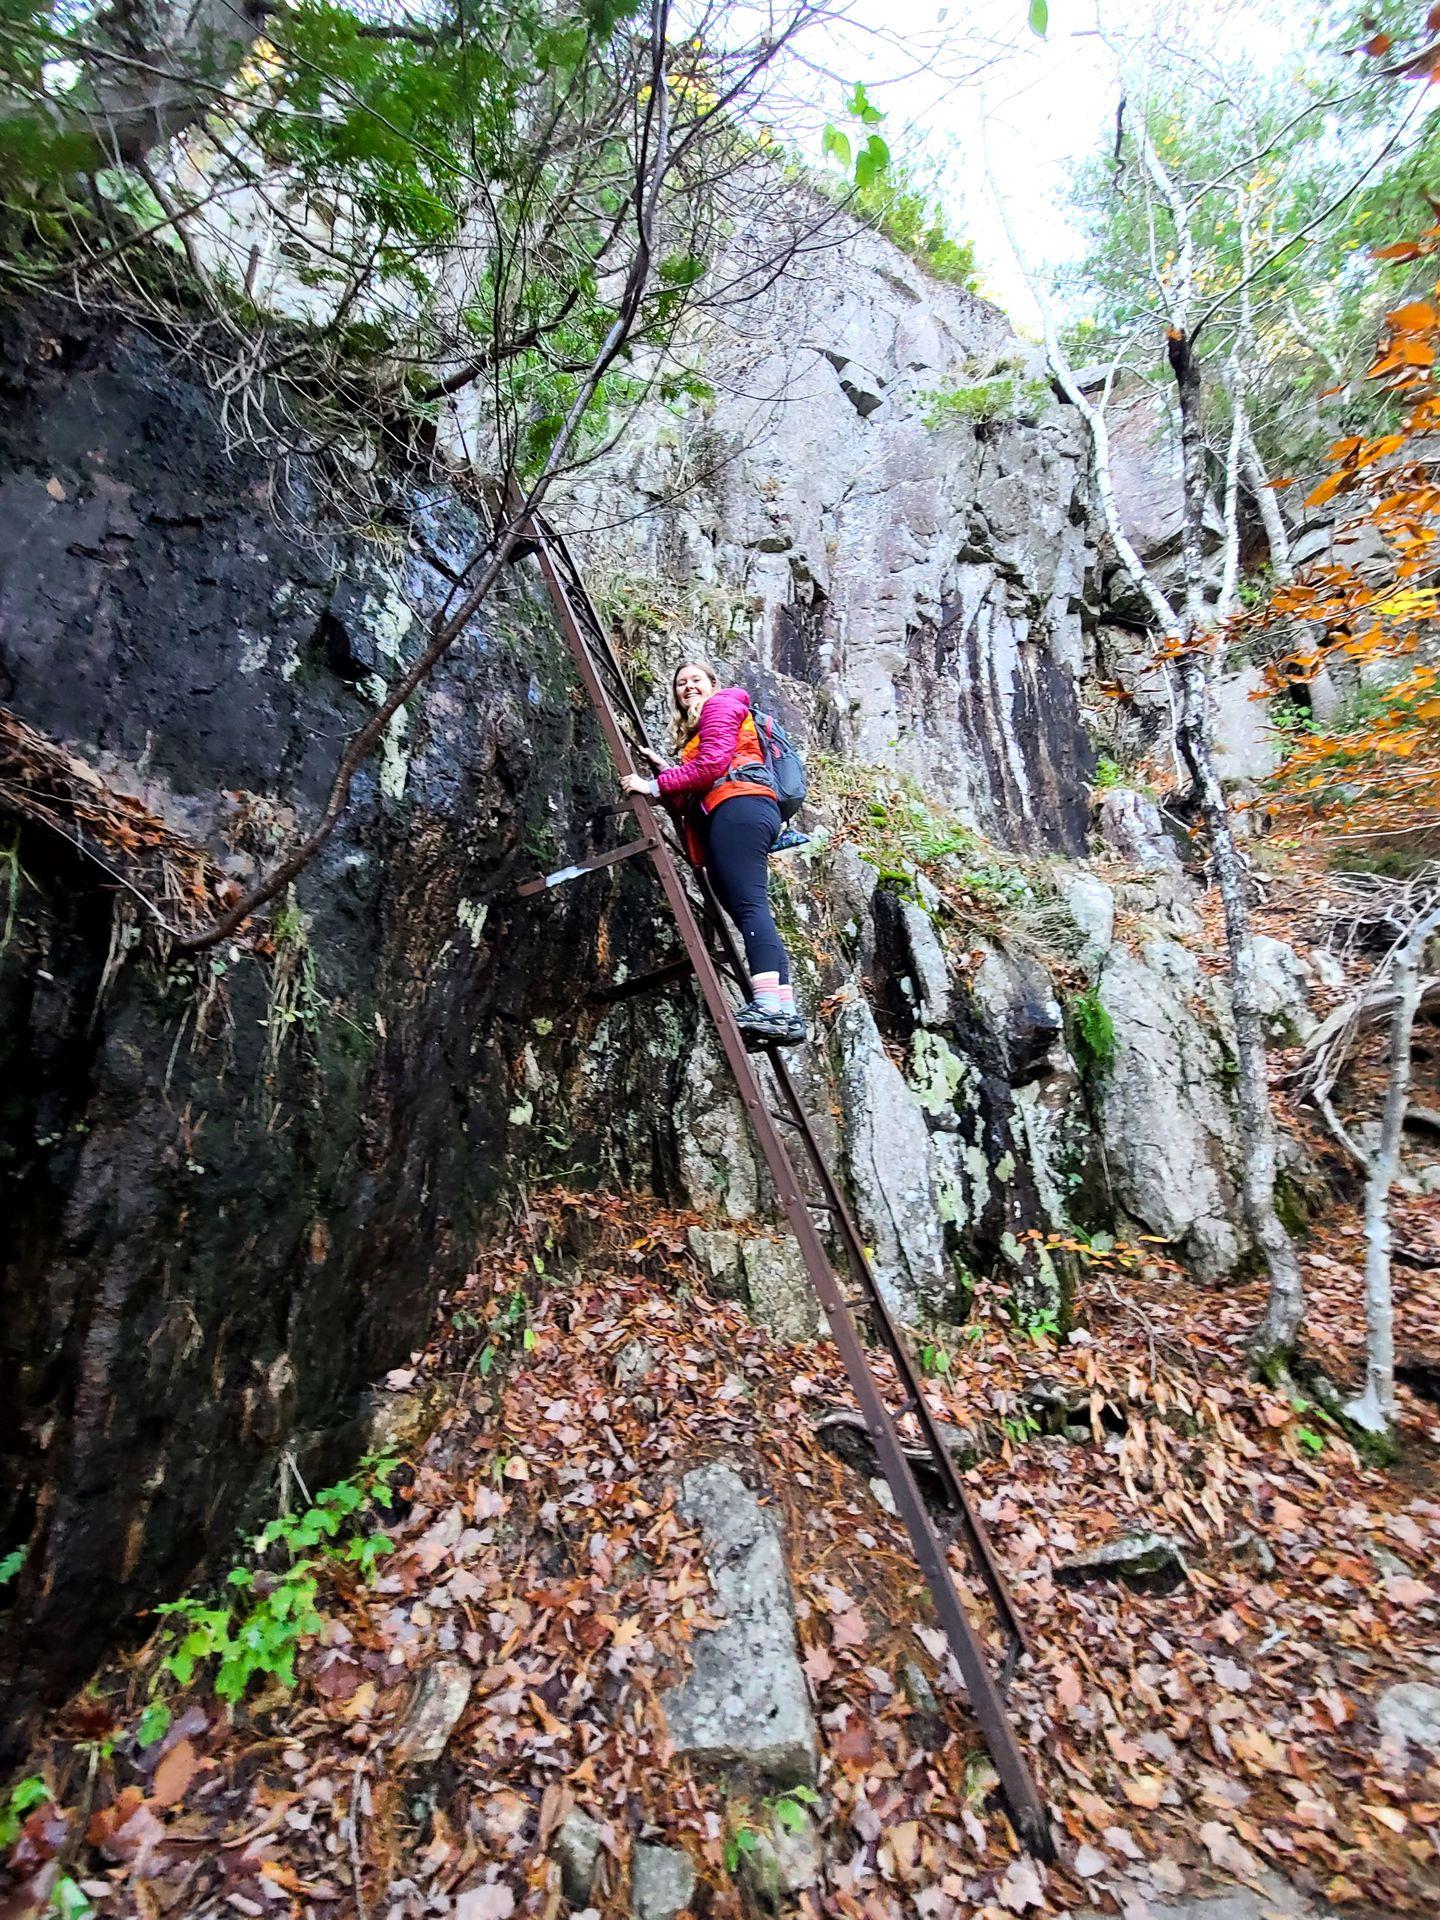 Lydia on a tall, metal ladder in Acadia National Park